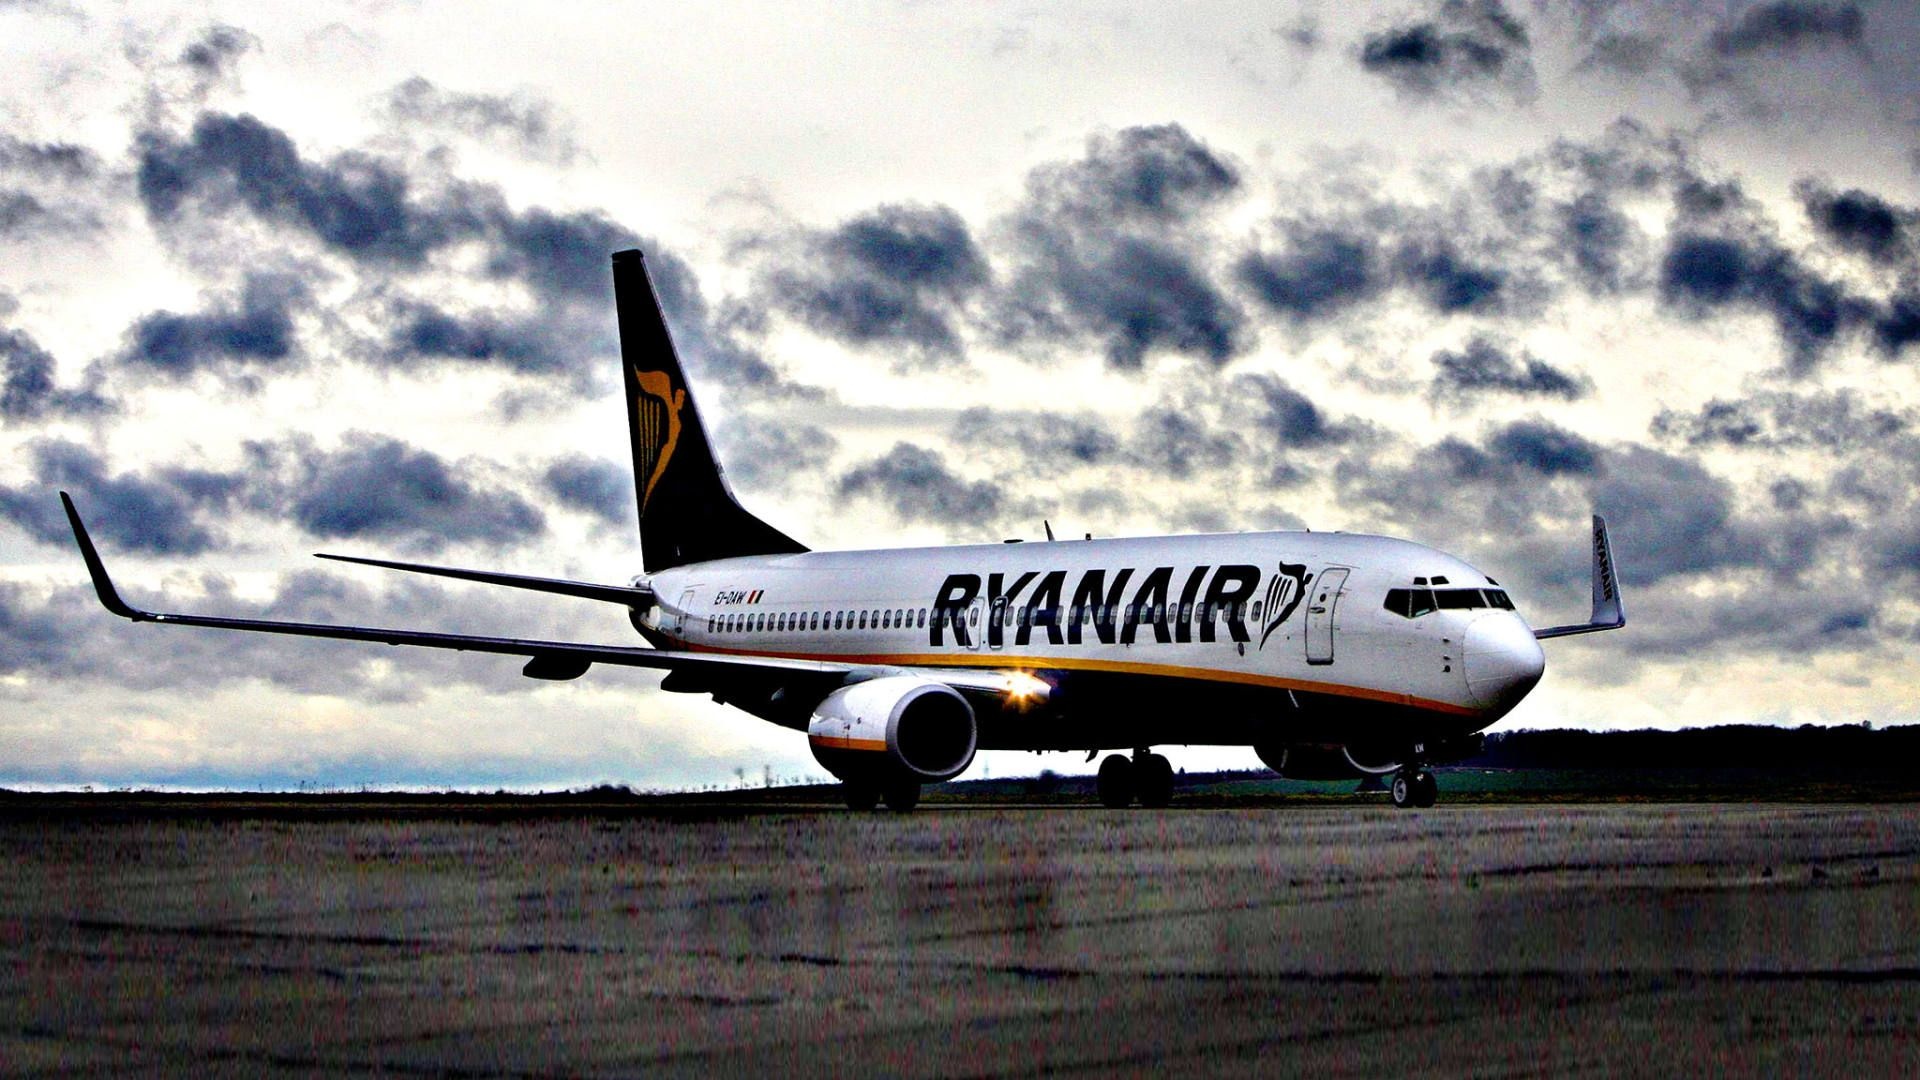 Ryanair, Top free backgrounds, Airline wallpapers, Travel with Ryanair, 1920x1080 Full HD Desktop